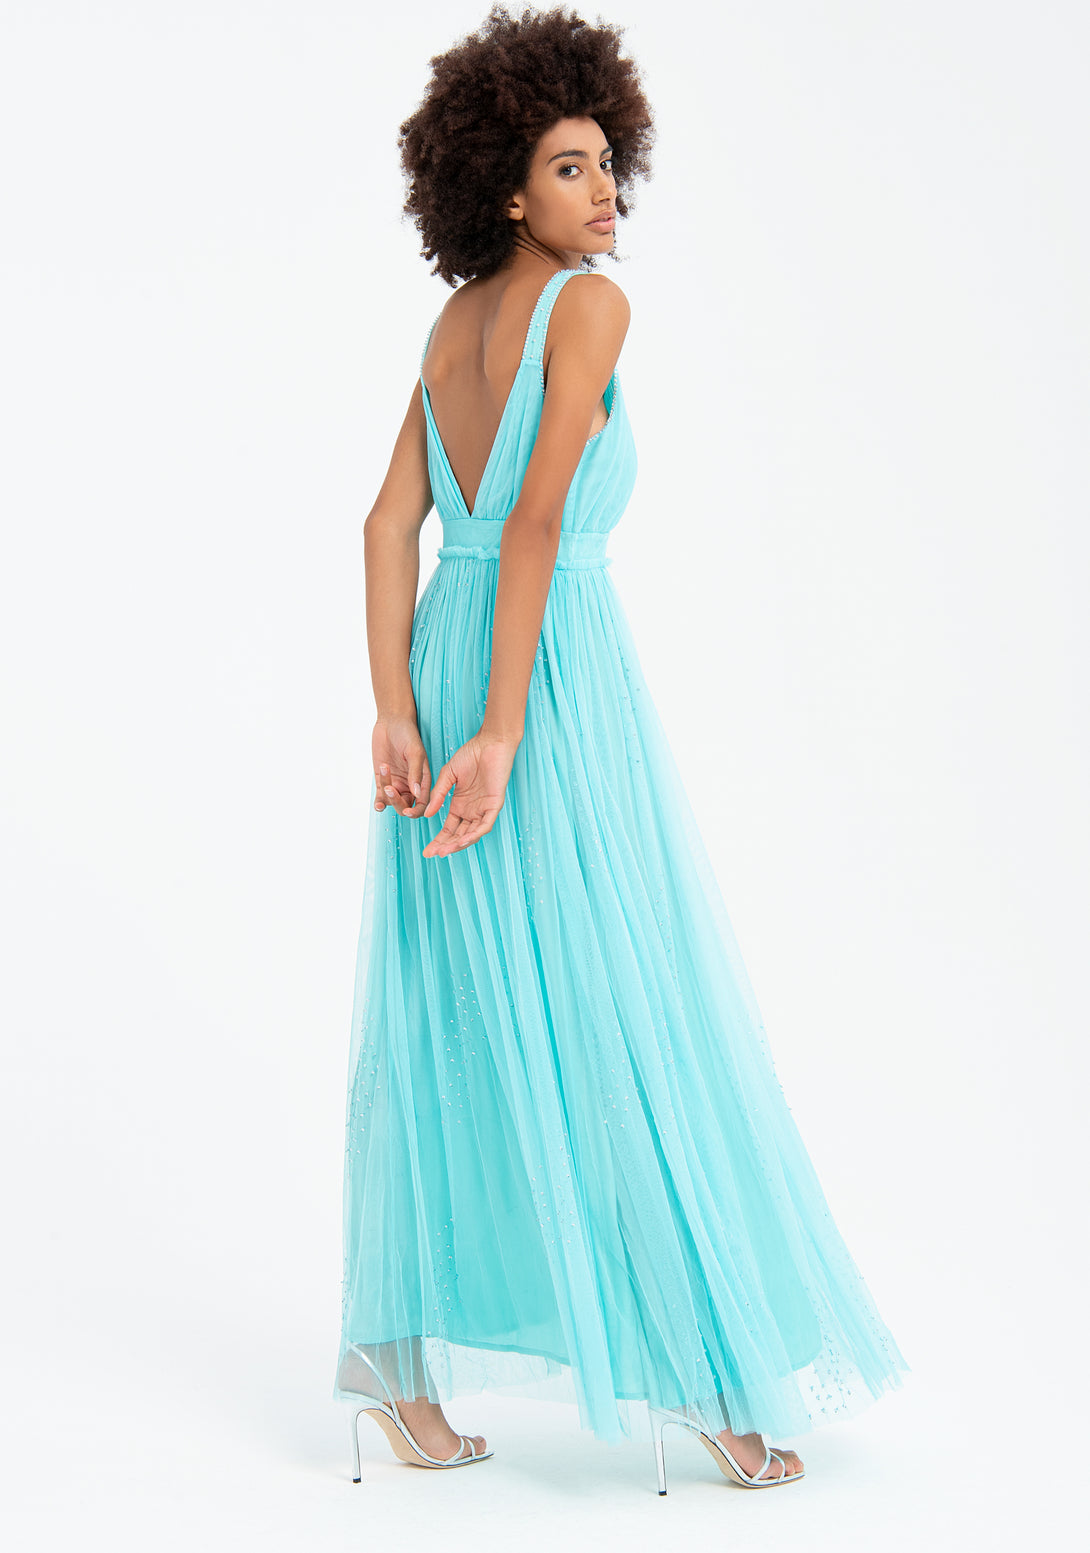 Dress with no sleeves, long, made in tulle fabric with shiny strasses